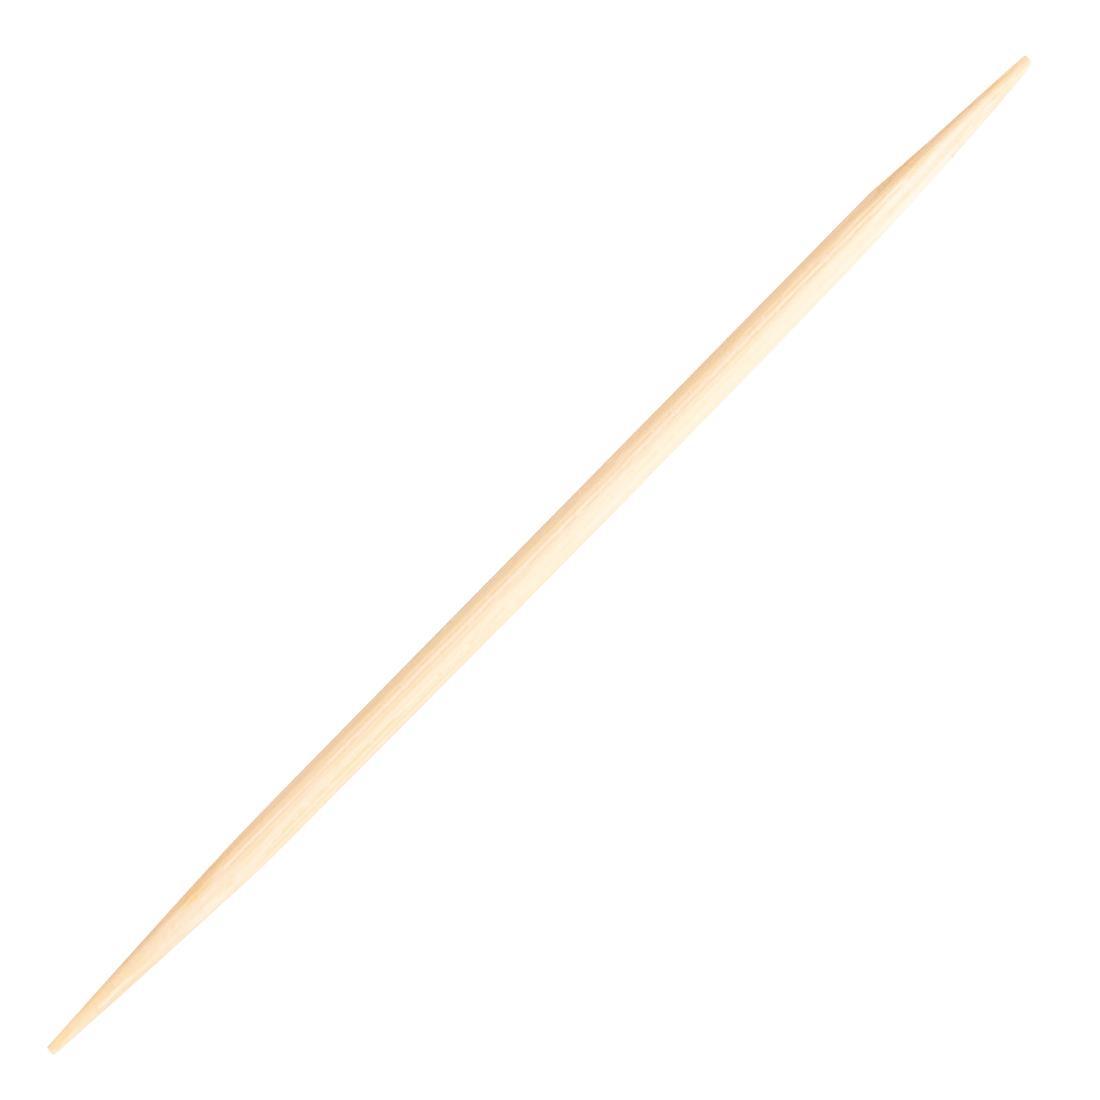 Individually Wrapped Biodegradable Bamboo Toothpicks (Pack of 1000) - DA015  - 1